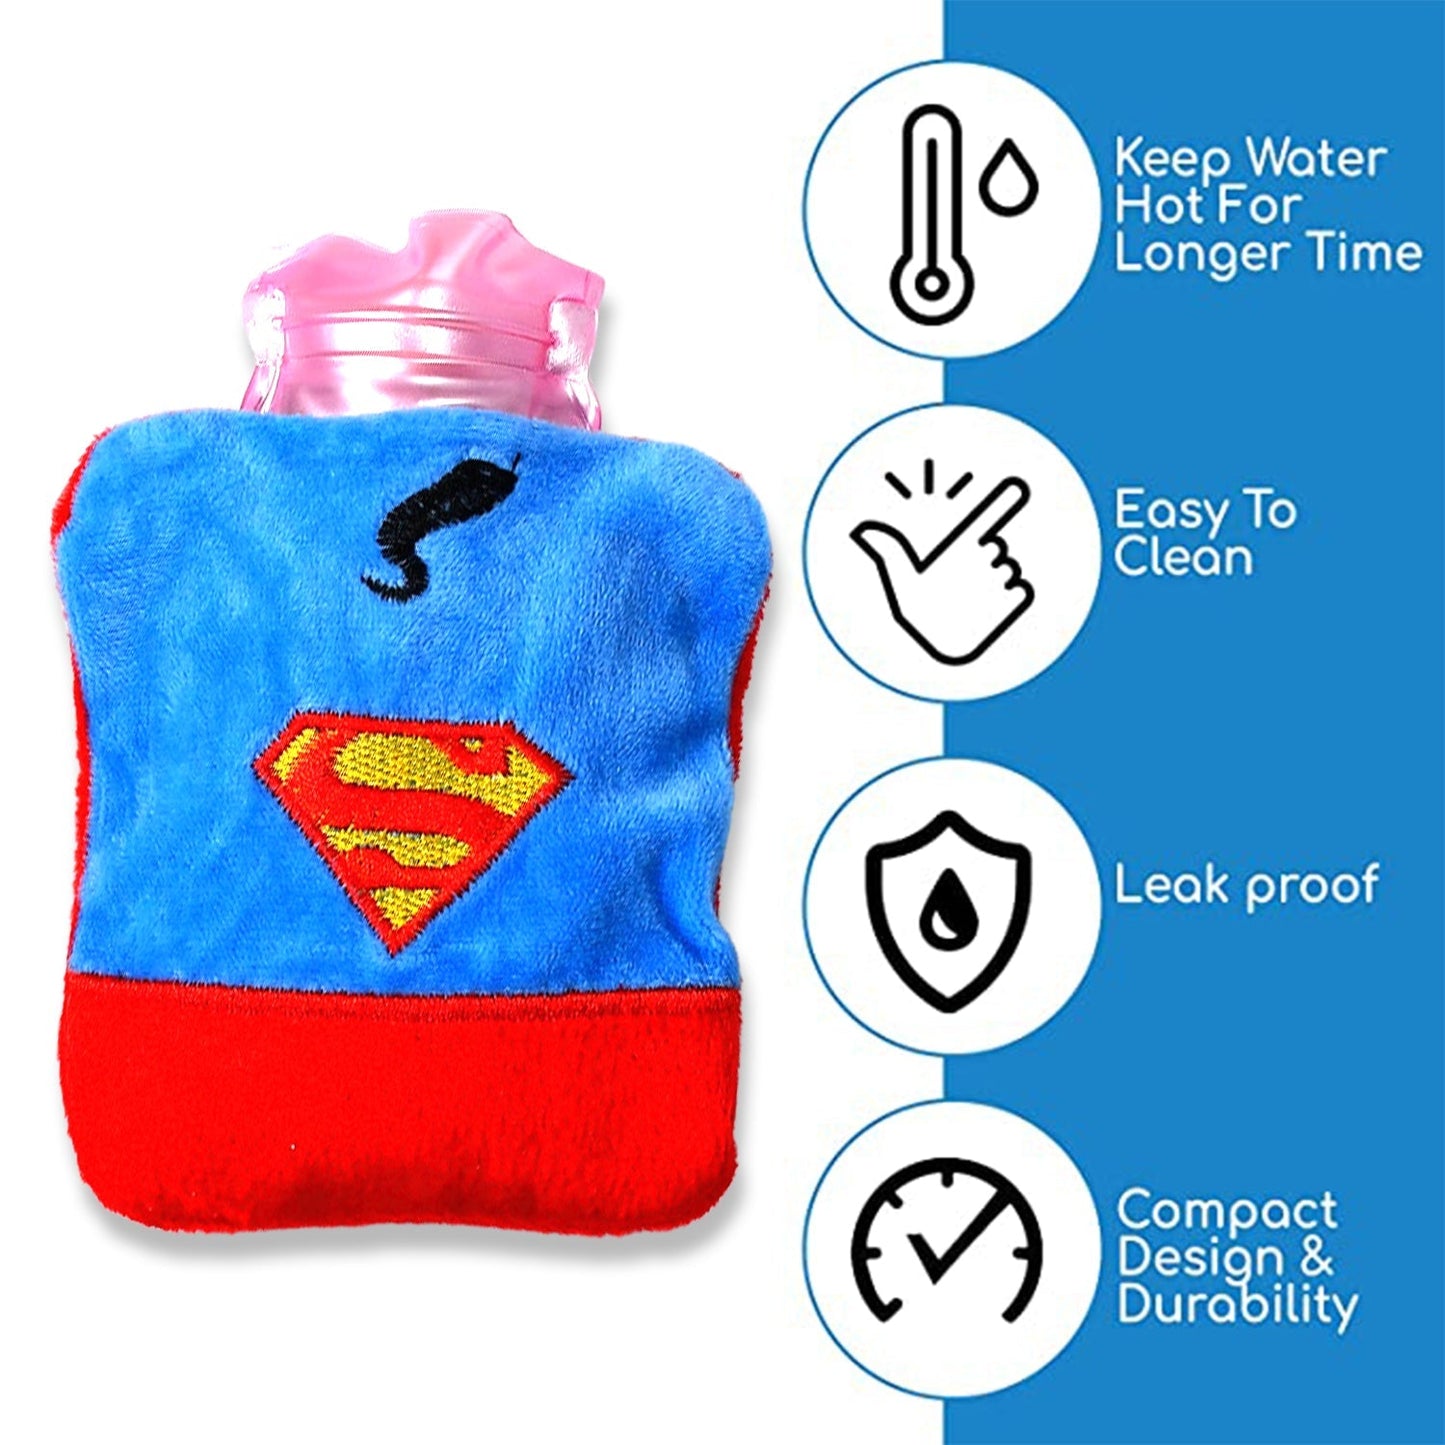 6530 Superman Print small Hot Water Bag with Cover for Pain Relief, Neck, Shoulder Pain and Hand, Feet Warmer, Menstrual Cramps. DeoDap